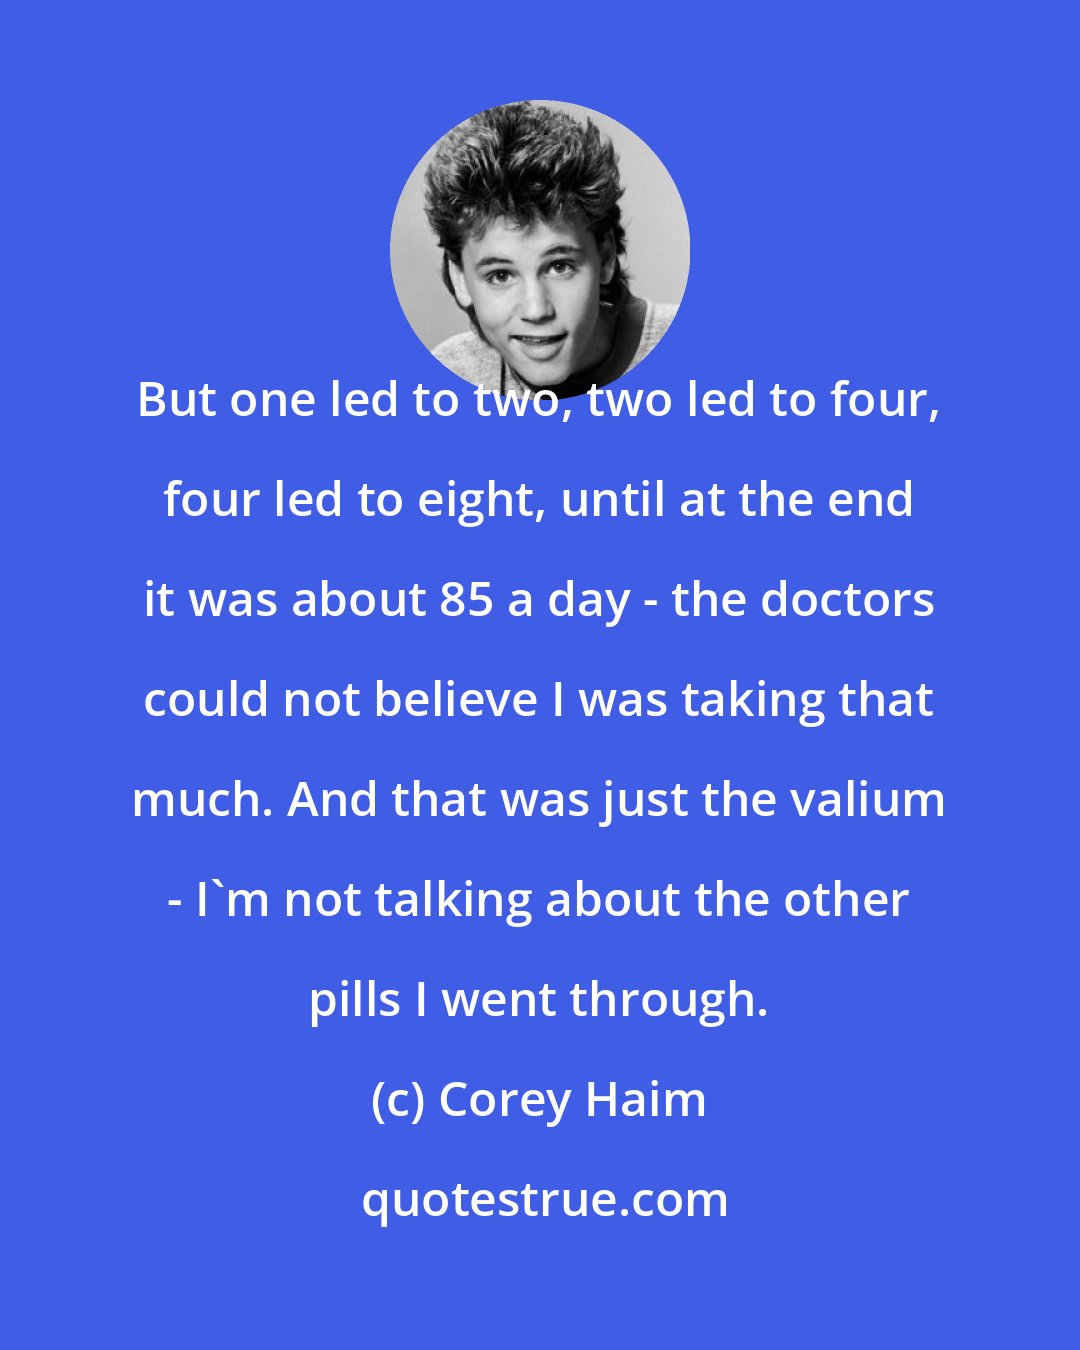 Corey Haim: But one led to two, two led to four, four led to eight, until at the end it was about 85 a day - the doctors could not believe I was taking that much. And that was just the valium - I'm not talking about the other pills I went through.